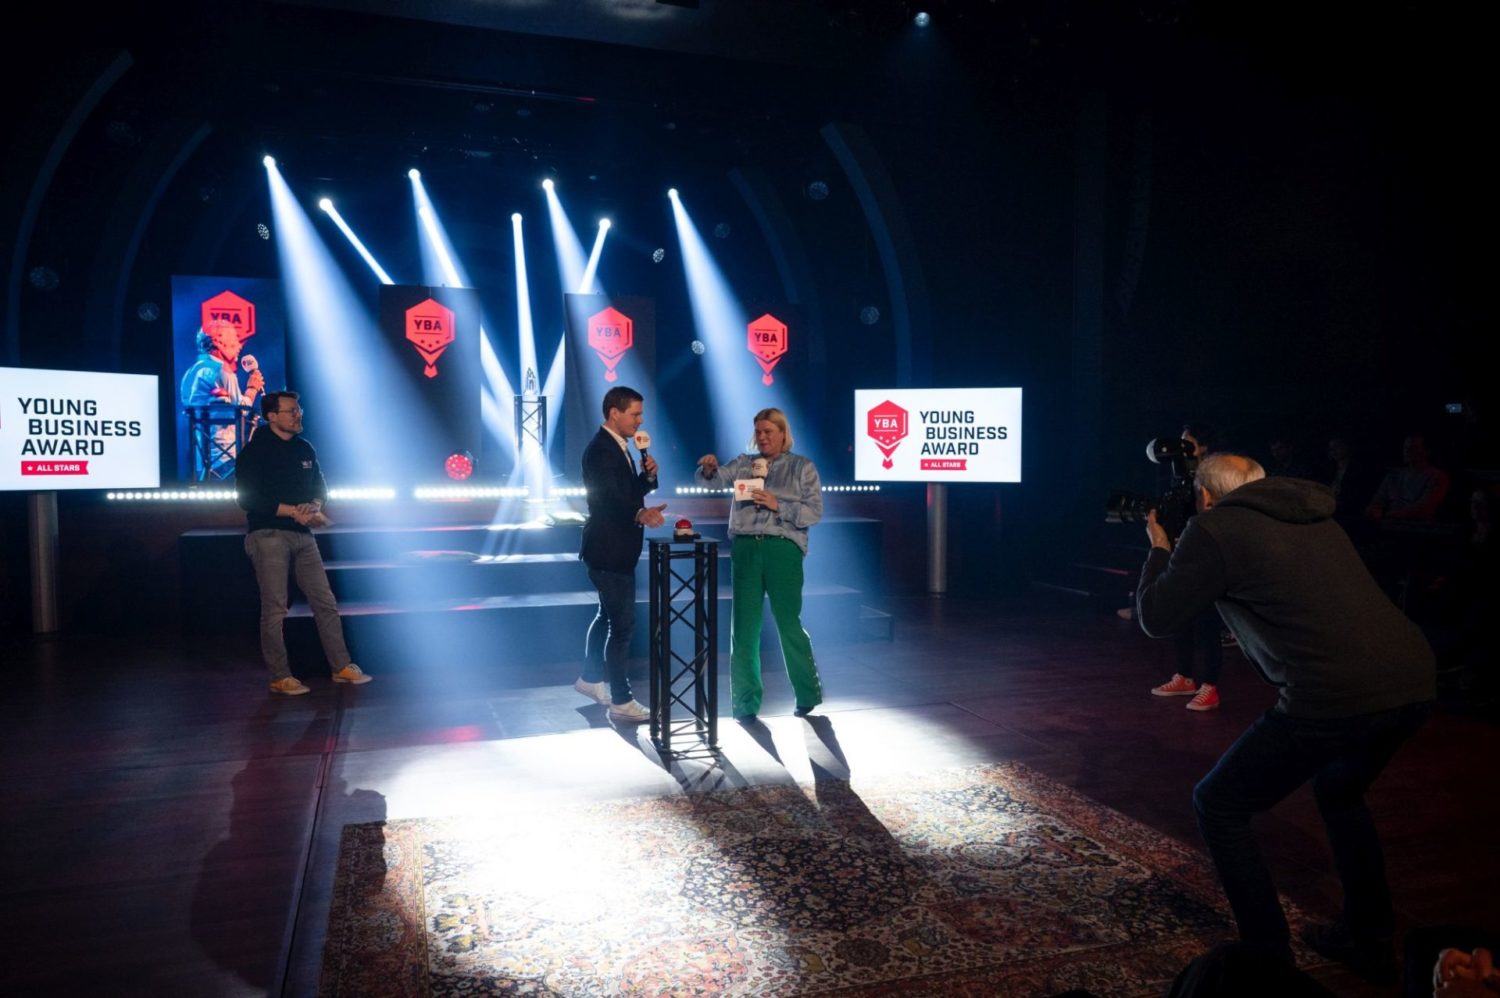 AFAS Young Business Award takes substantial step into the future